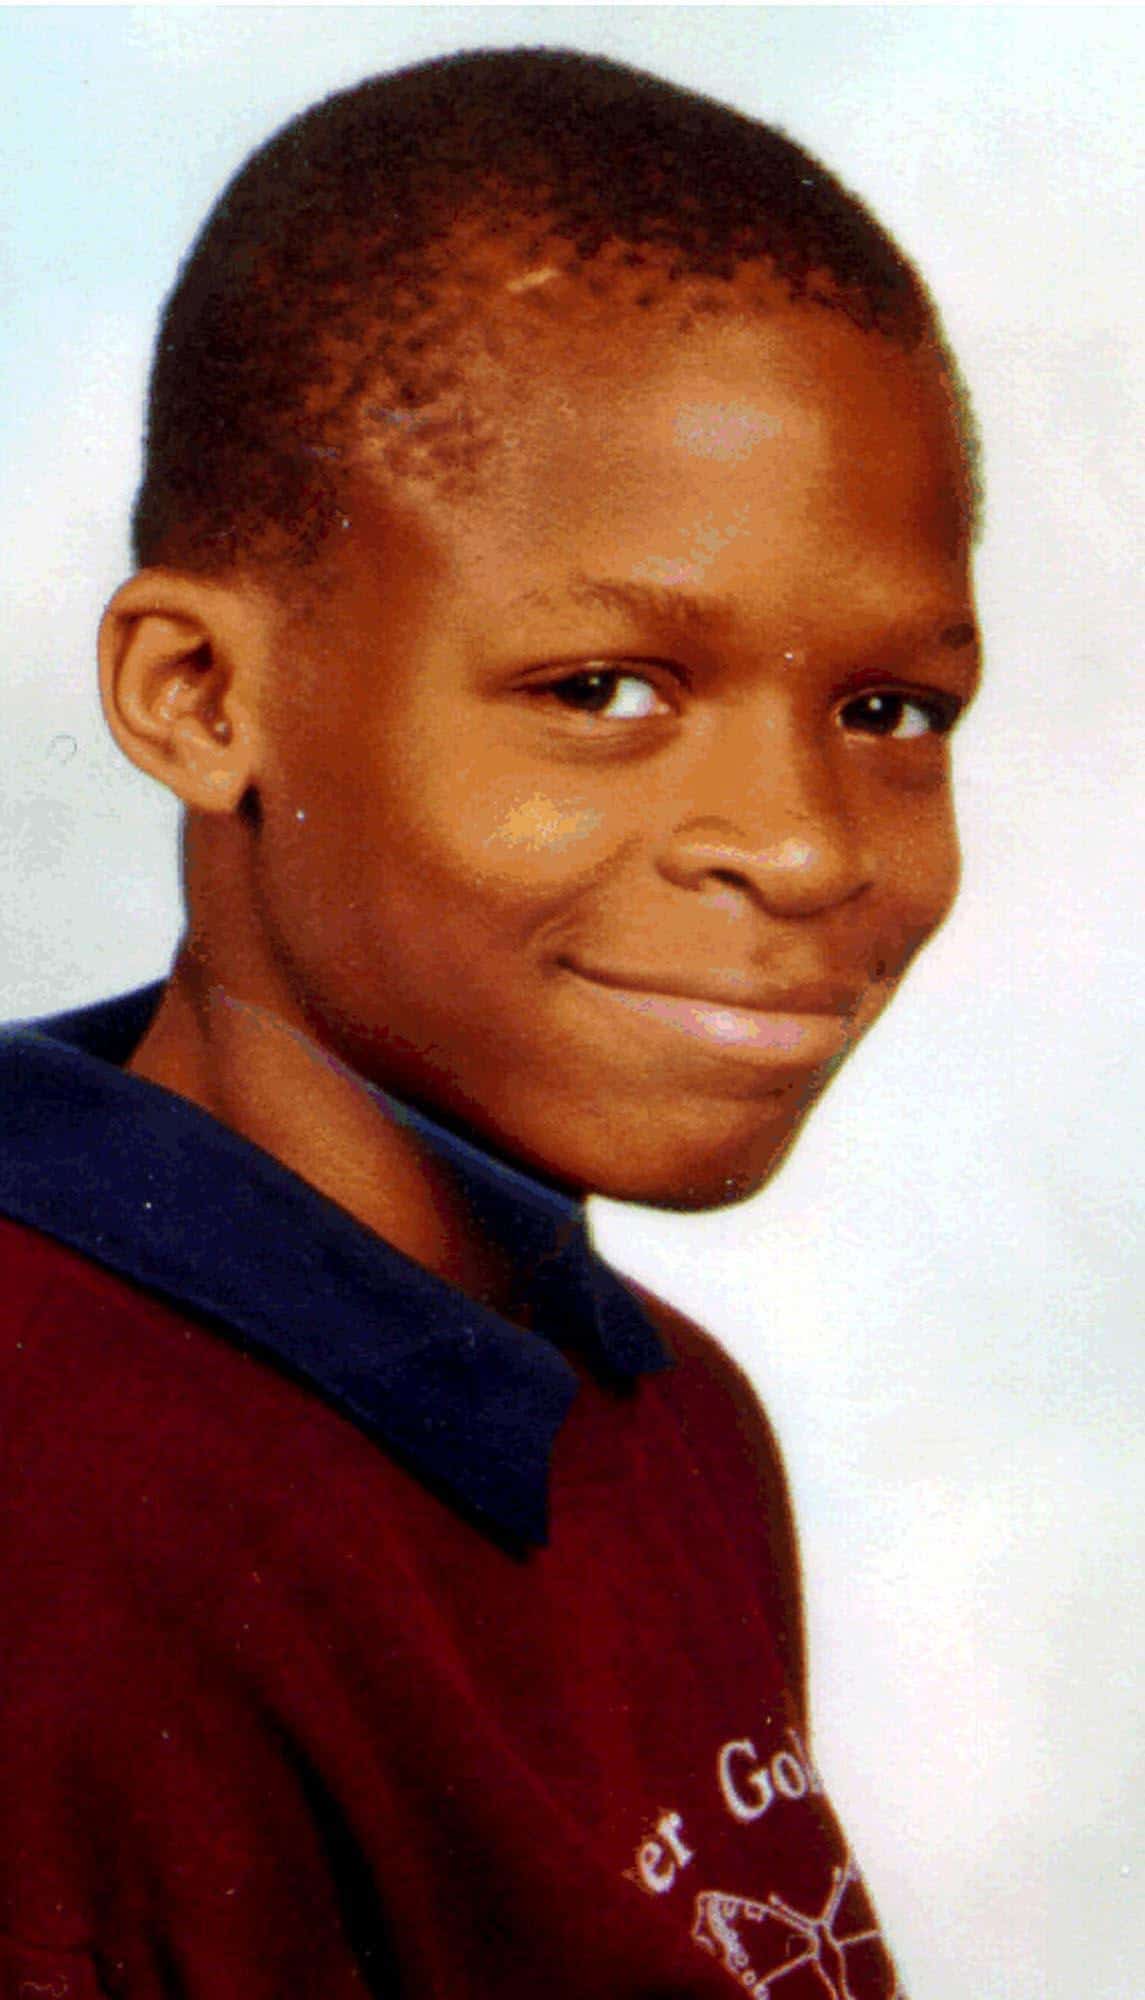 Undated handout file photo of Damilola Taylor, whose father has said that Star Wars actor John Boyega was one of the last people to see Damilola alive.